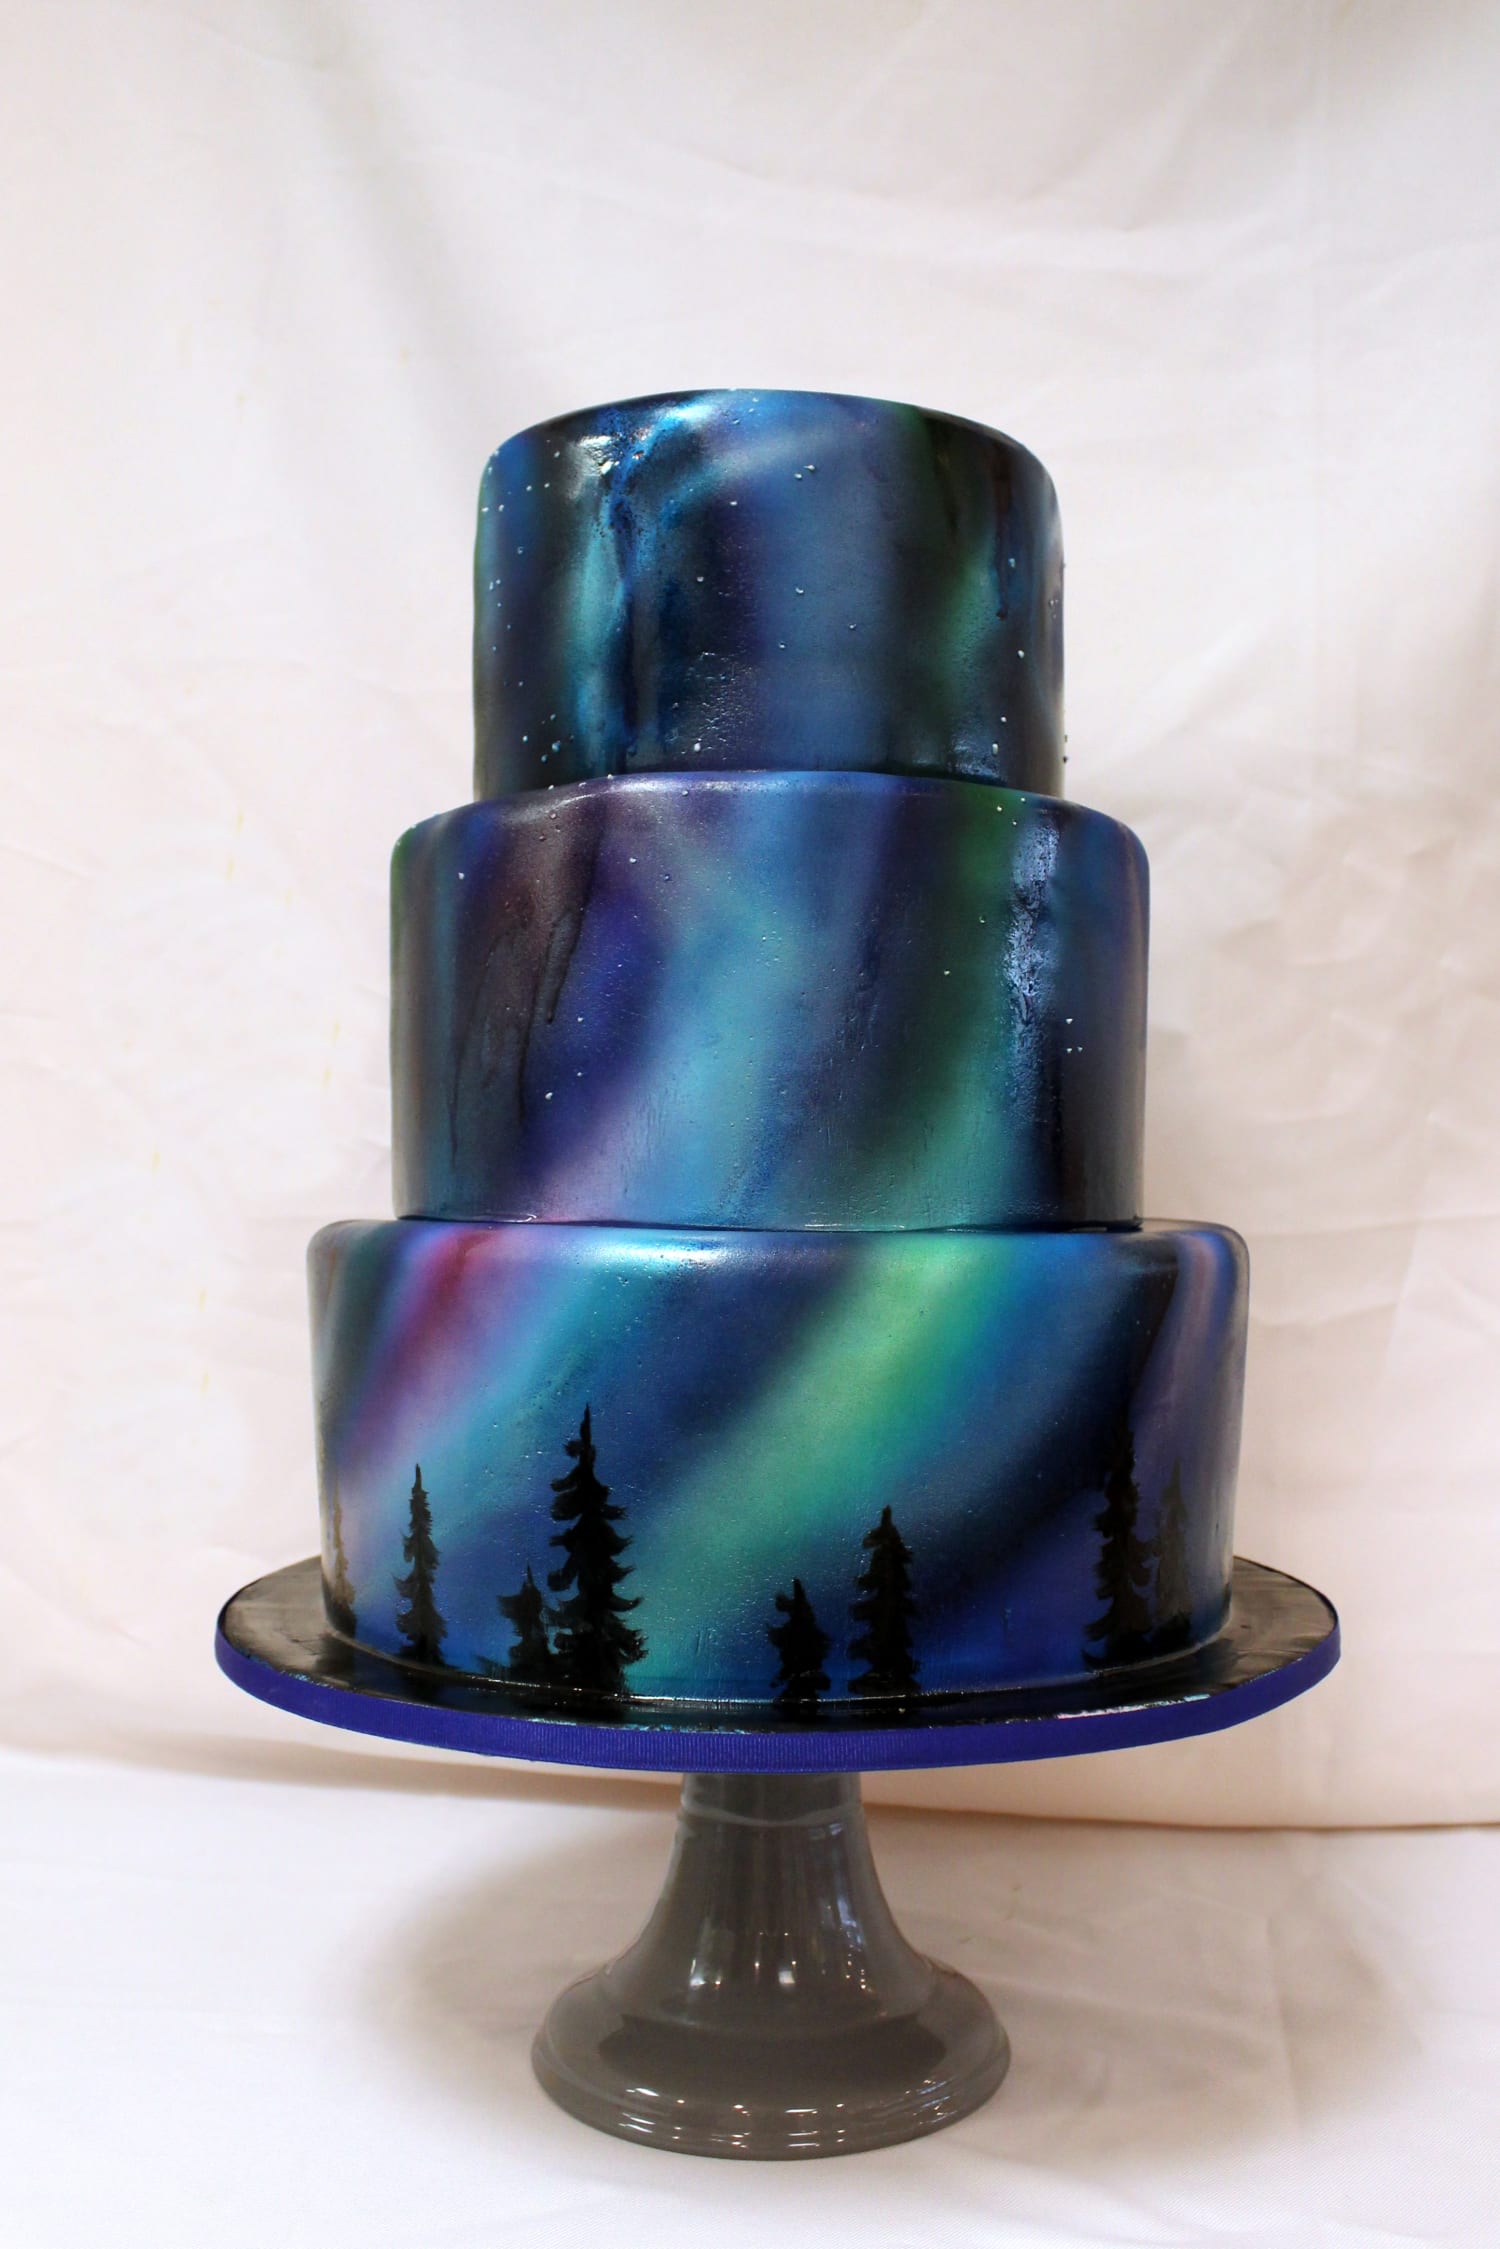 IV. Step-by-Step Guide to Decorating Galaxy Cakes